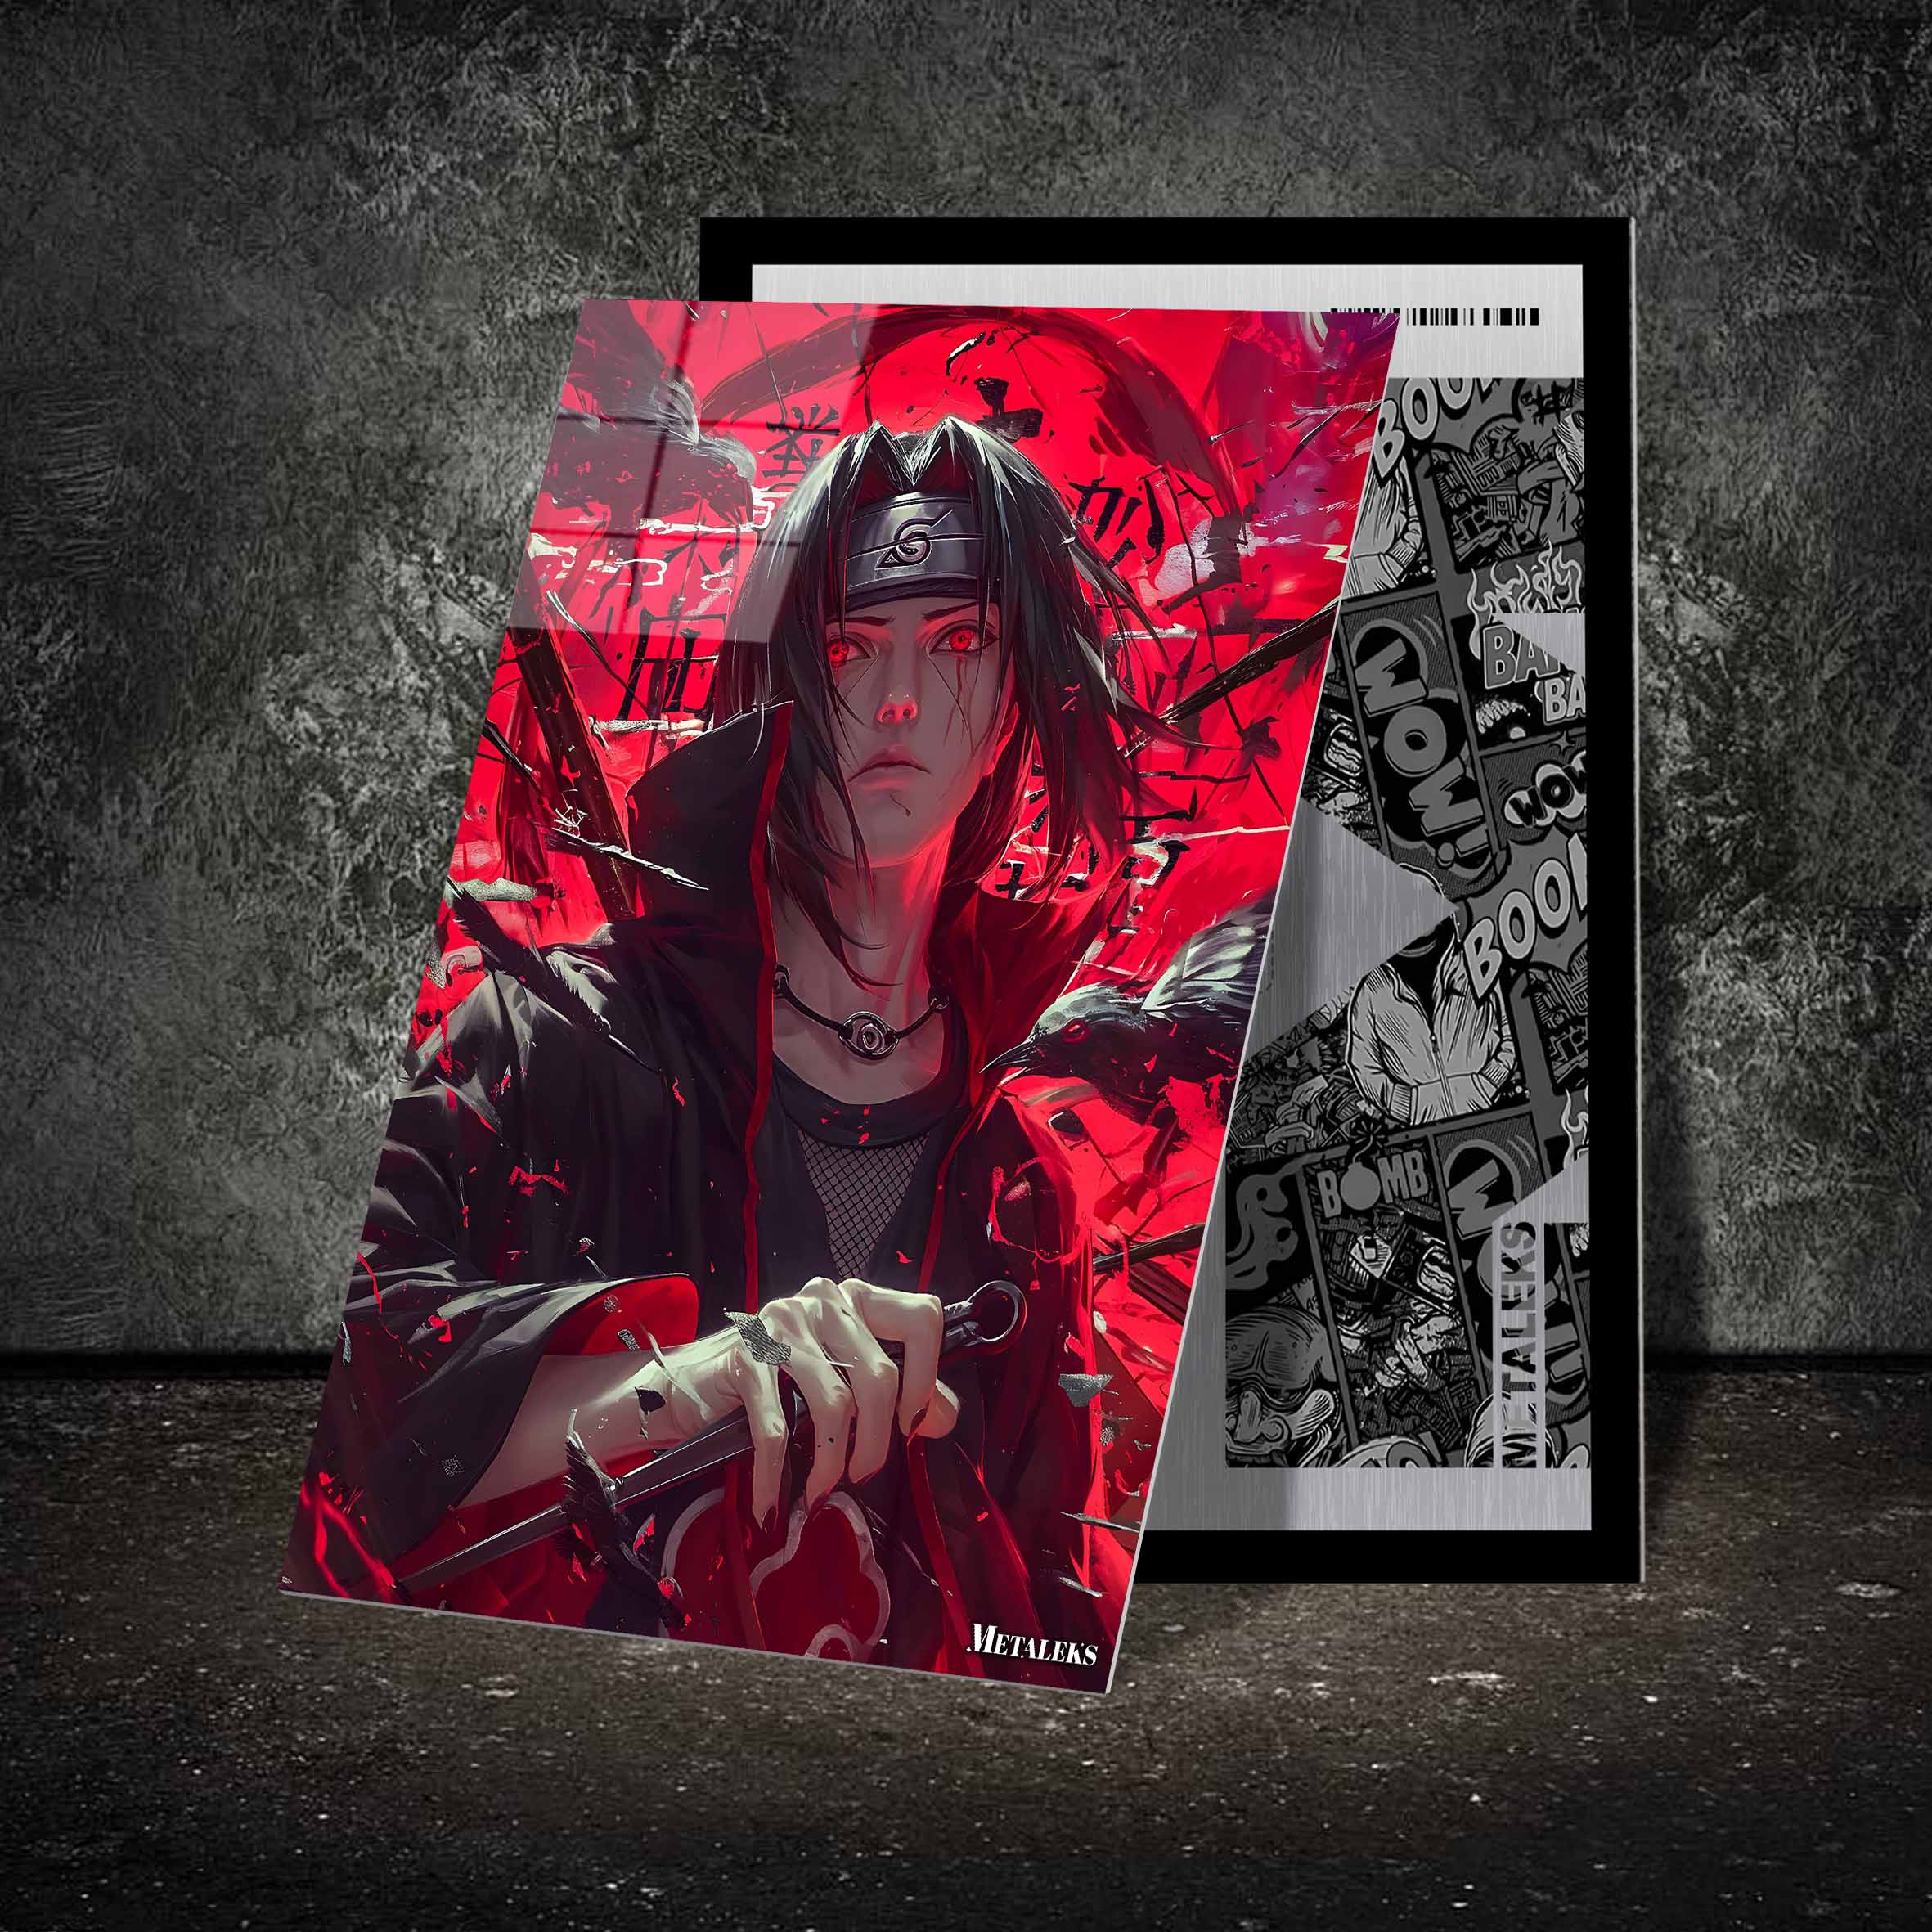 Mighty Itachi-designed by @Minty Art